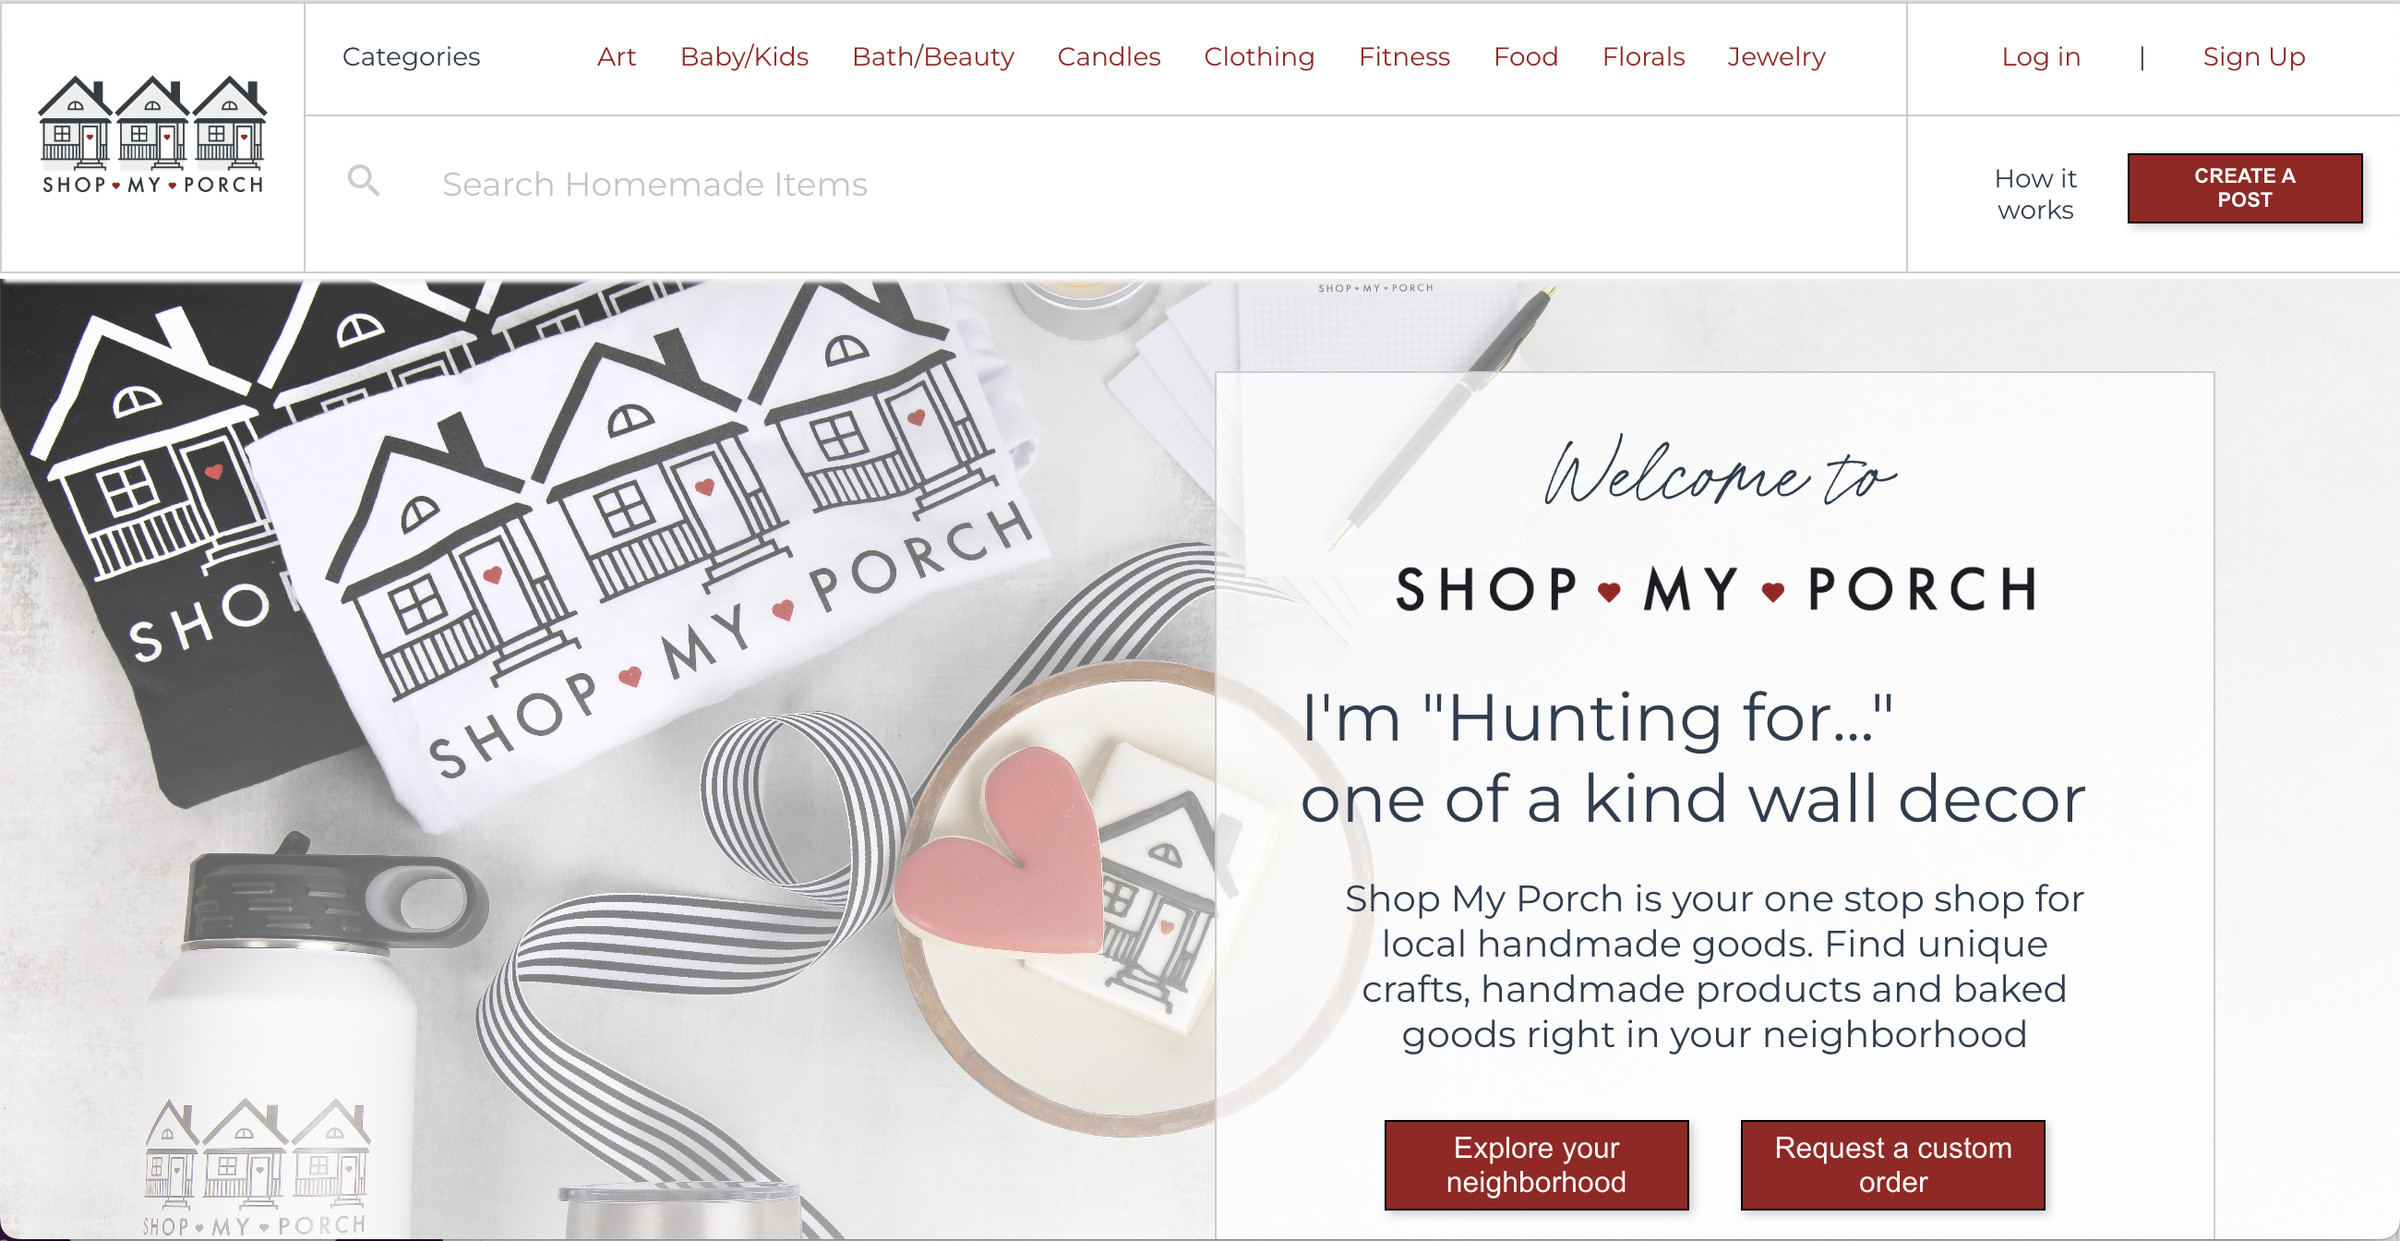 Web page with logo of three houses and the words “Welcome to Shop My Port, I’m hunting for...one of a kind wall decor” with a description of the site and buttons that say “Explore your neighborhood” and “Request a custom order.”